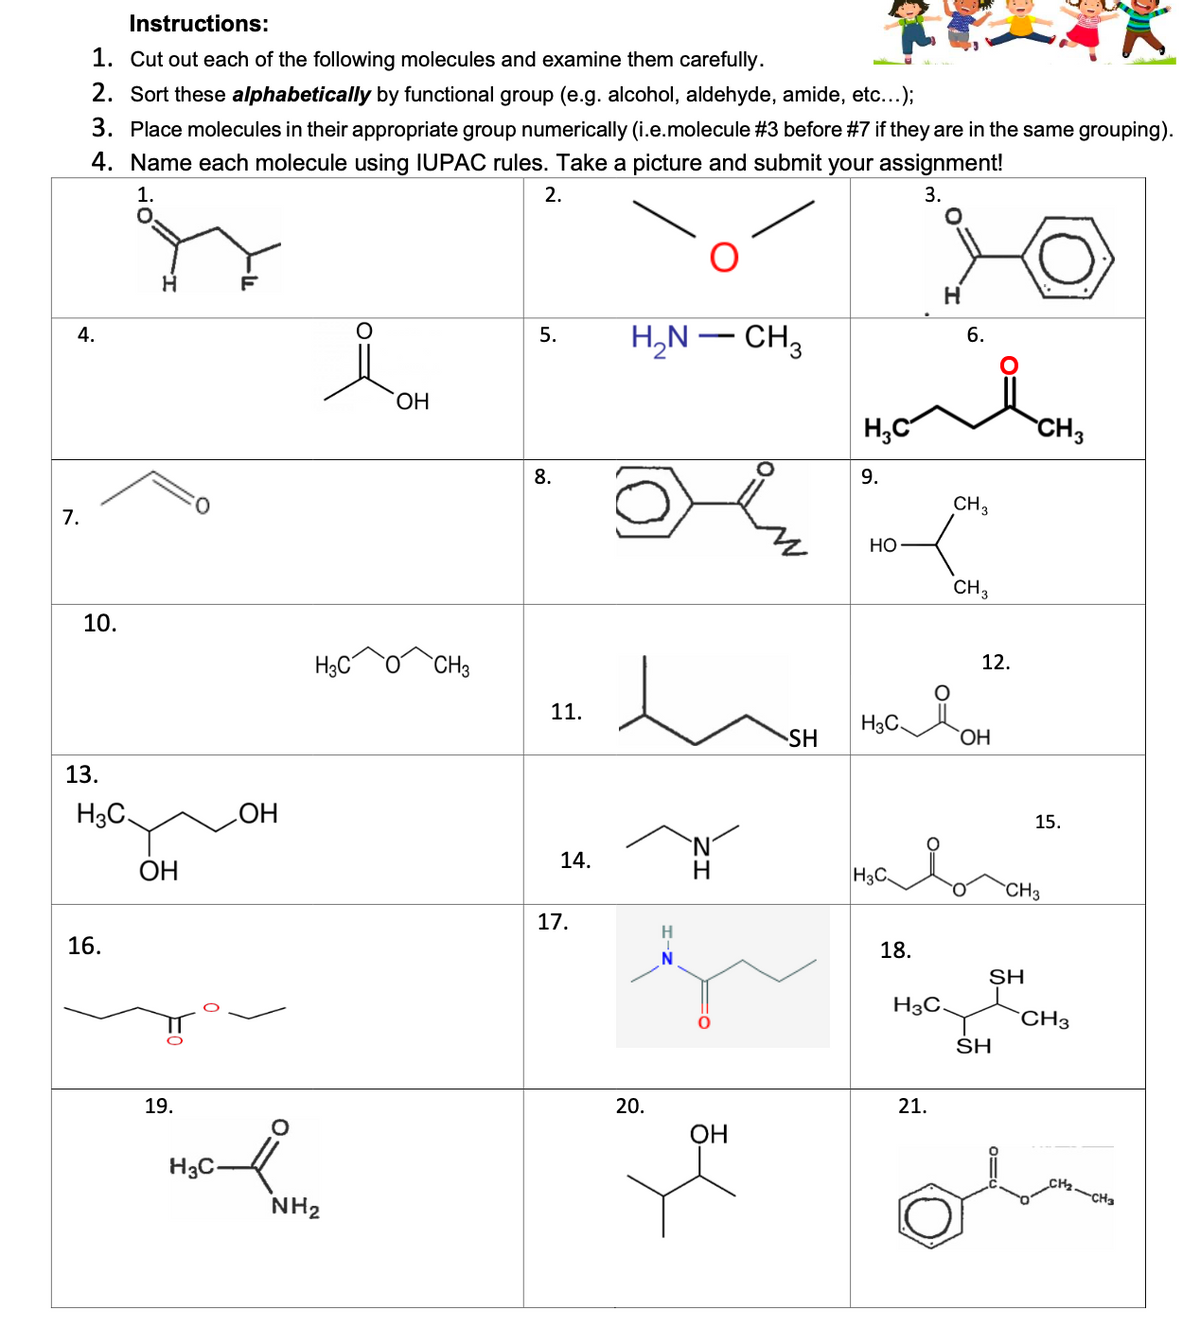 4.
7.
Instructions:
1. Cut out each of the following molecules and examine them carefully.
2. Sort these alphabetically by functional group (e.g. alcohol, aldehyde, amide, etc...);
3. Place molecules in their appropriate group numerically (i.e.molecule #3 before #7 if they are in the same grouping).
4. Name each molecule using IUPAC rules. Take a picture and submit your assignment!
1.
2.
3.
10.
13.
H3C
16.
OH
IT
O
OH
19.
H3C
HERNING
H3C-
NH₂
OH
CH3
5.
8.
11.
14.
17.
H₂N - CH₂
20.
OH
O
SH
H₂C
9.
HO
H3C
18.
H
6.
H3C.
21.
CH 3
CH 3
fon
12.
OH
halora
H3C
LAK
SH
SH
CH3
15.
CH3
CH3
CH₂ CH3